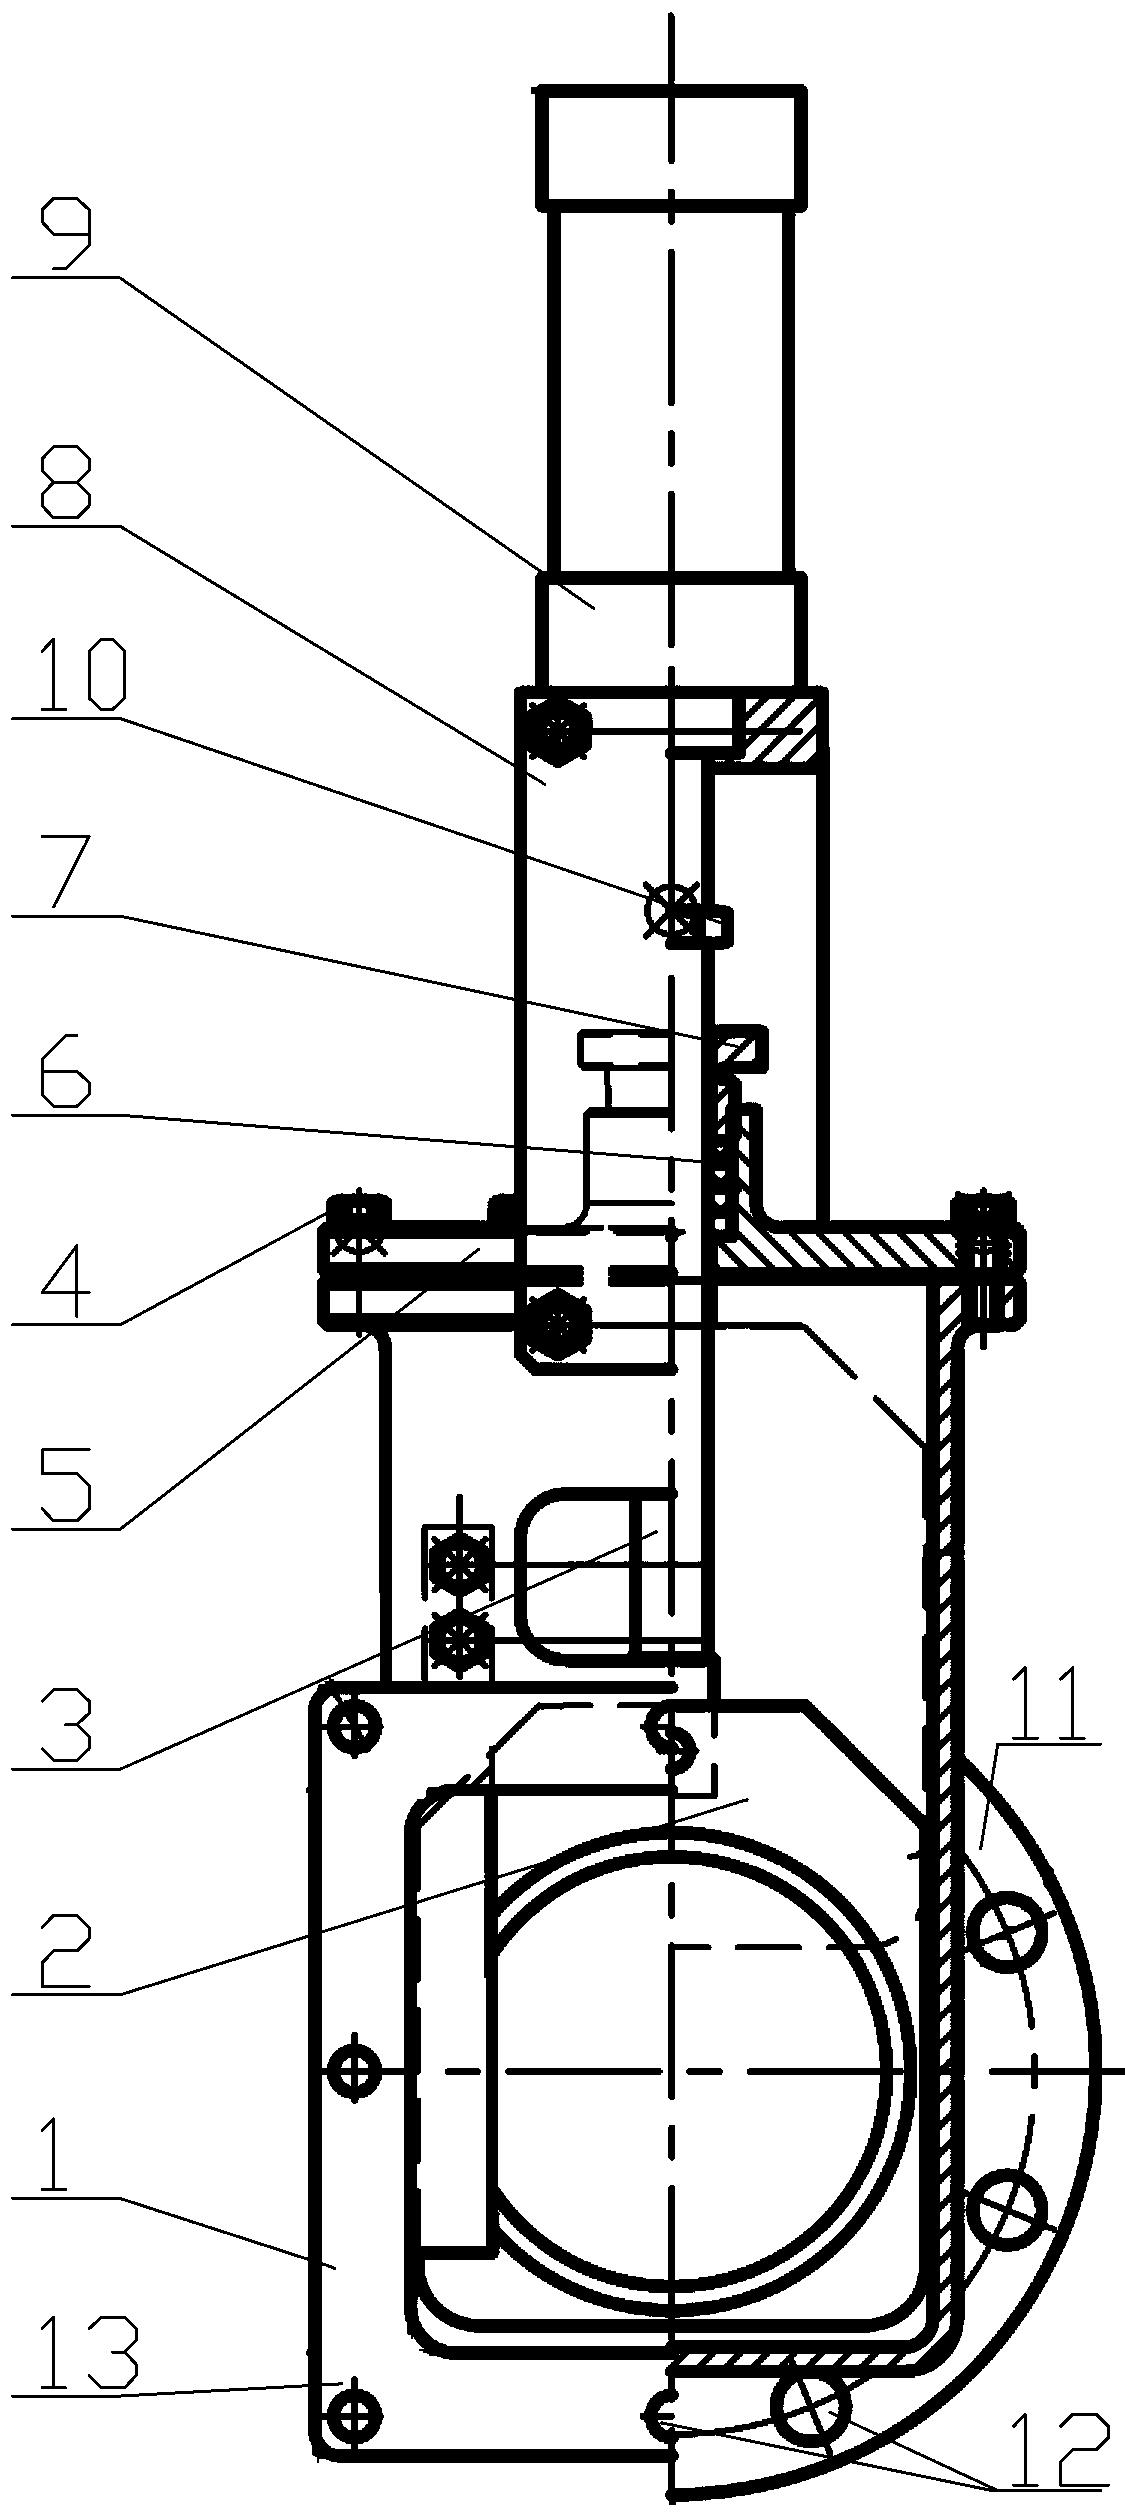 Automatic-control valve for automatically preparing solution